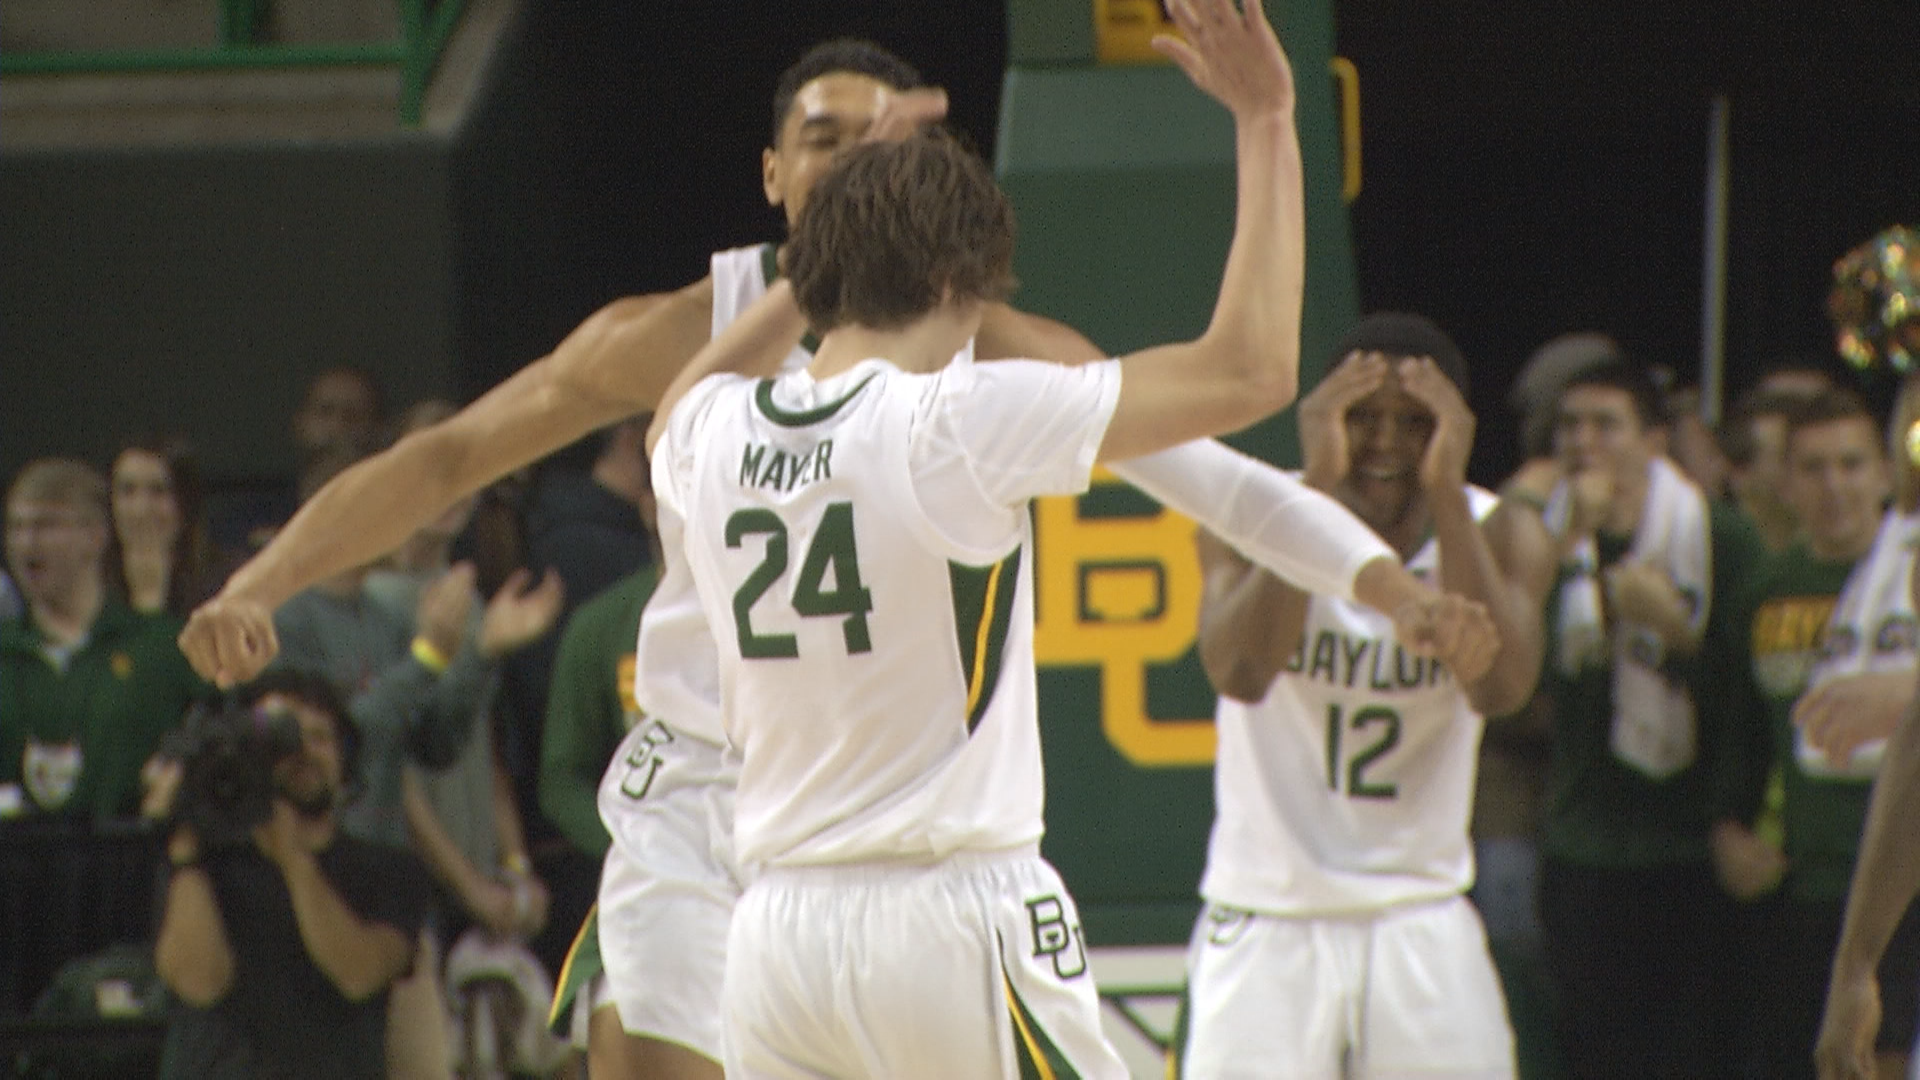 The 23-game win streak pushed Baylor to beat the record.